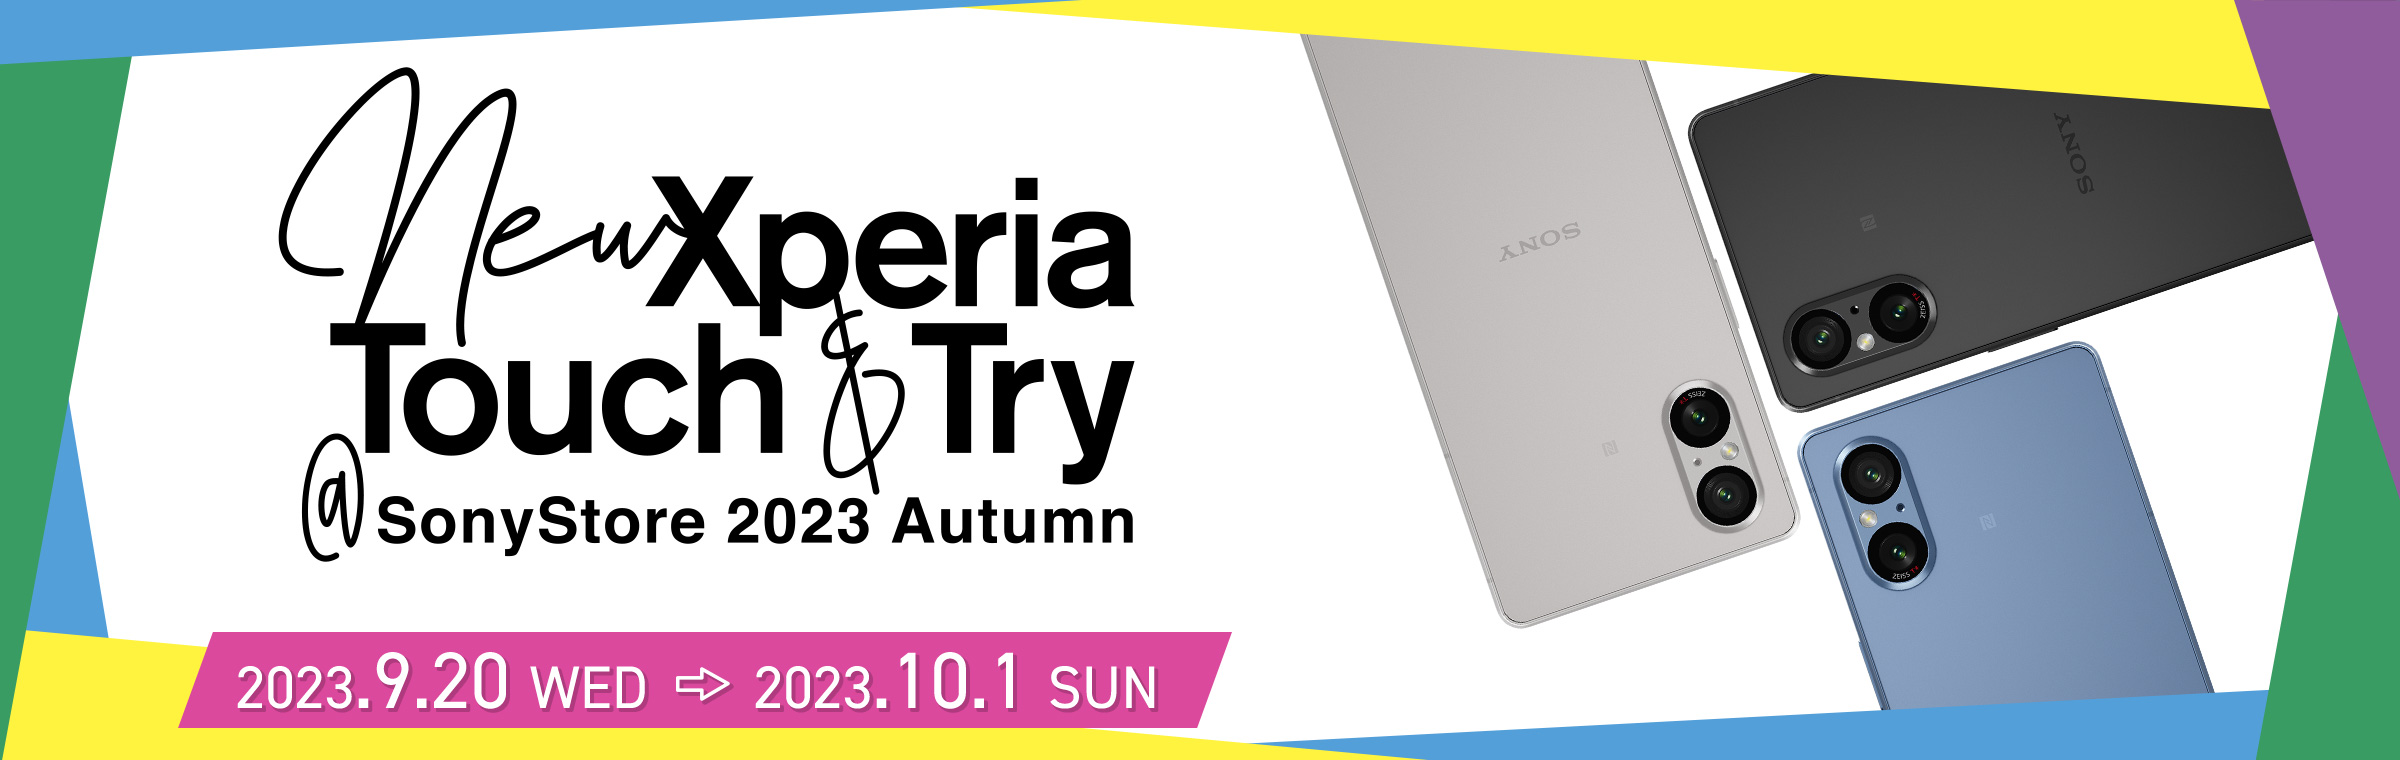 NewXperia Touch&Try SonyStore 2023 Autumn 2023.9.20 WED → 2023.10.1 SUN